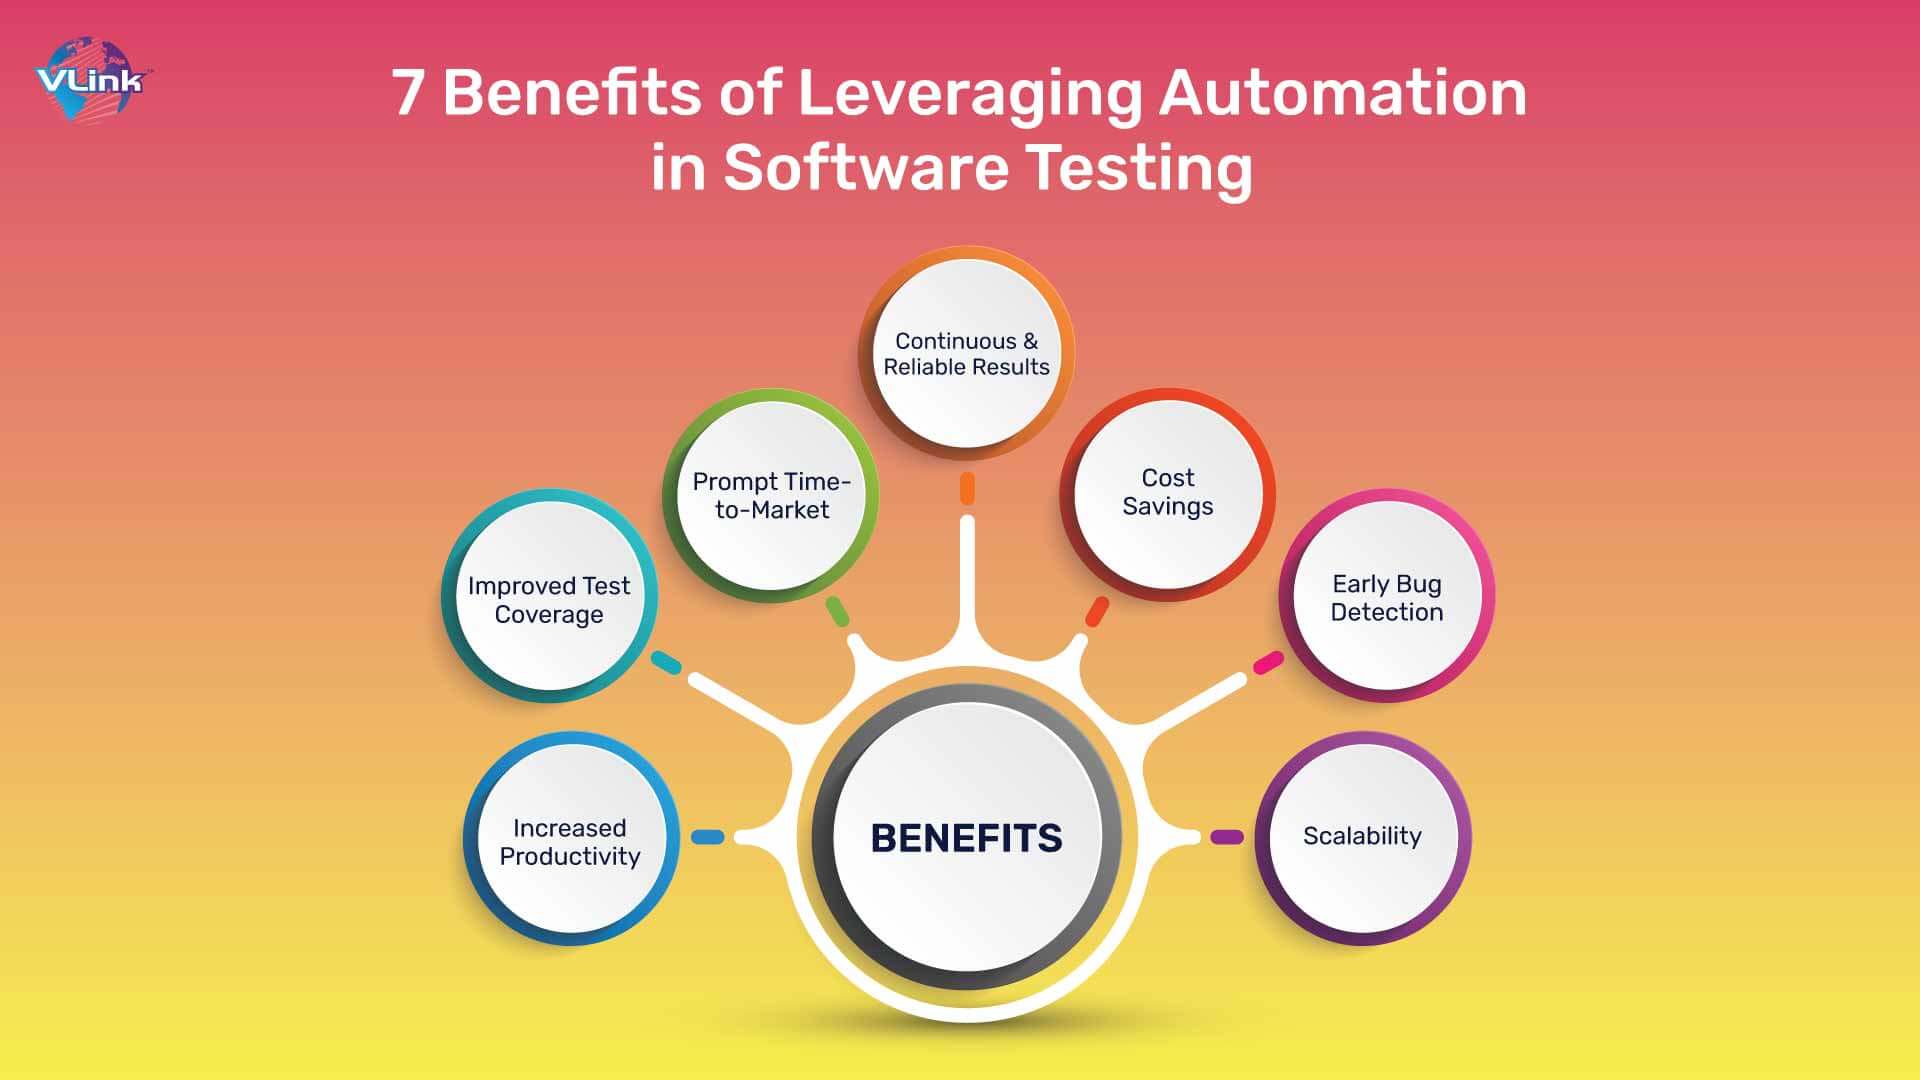 7 Benefits of Leveraging Automation in Software Testing